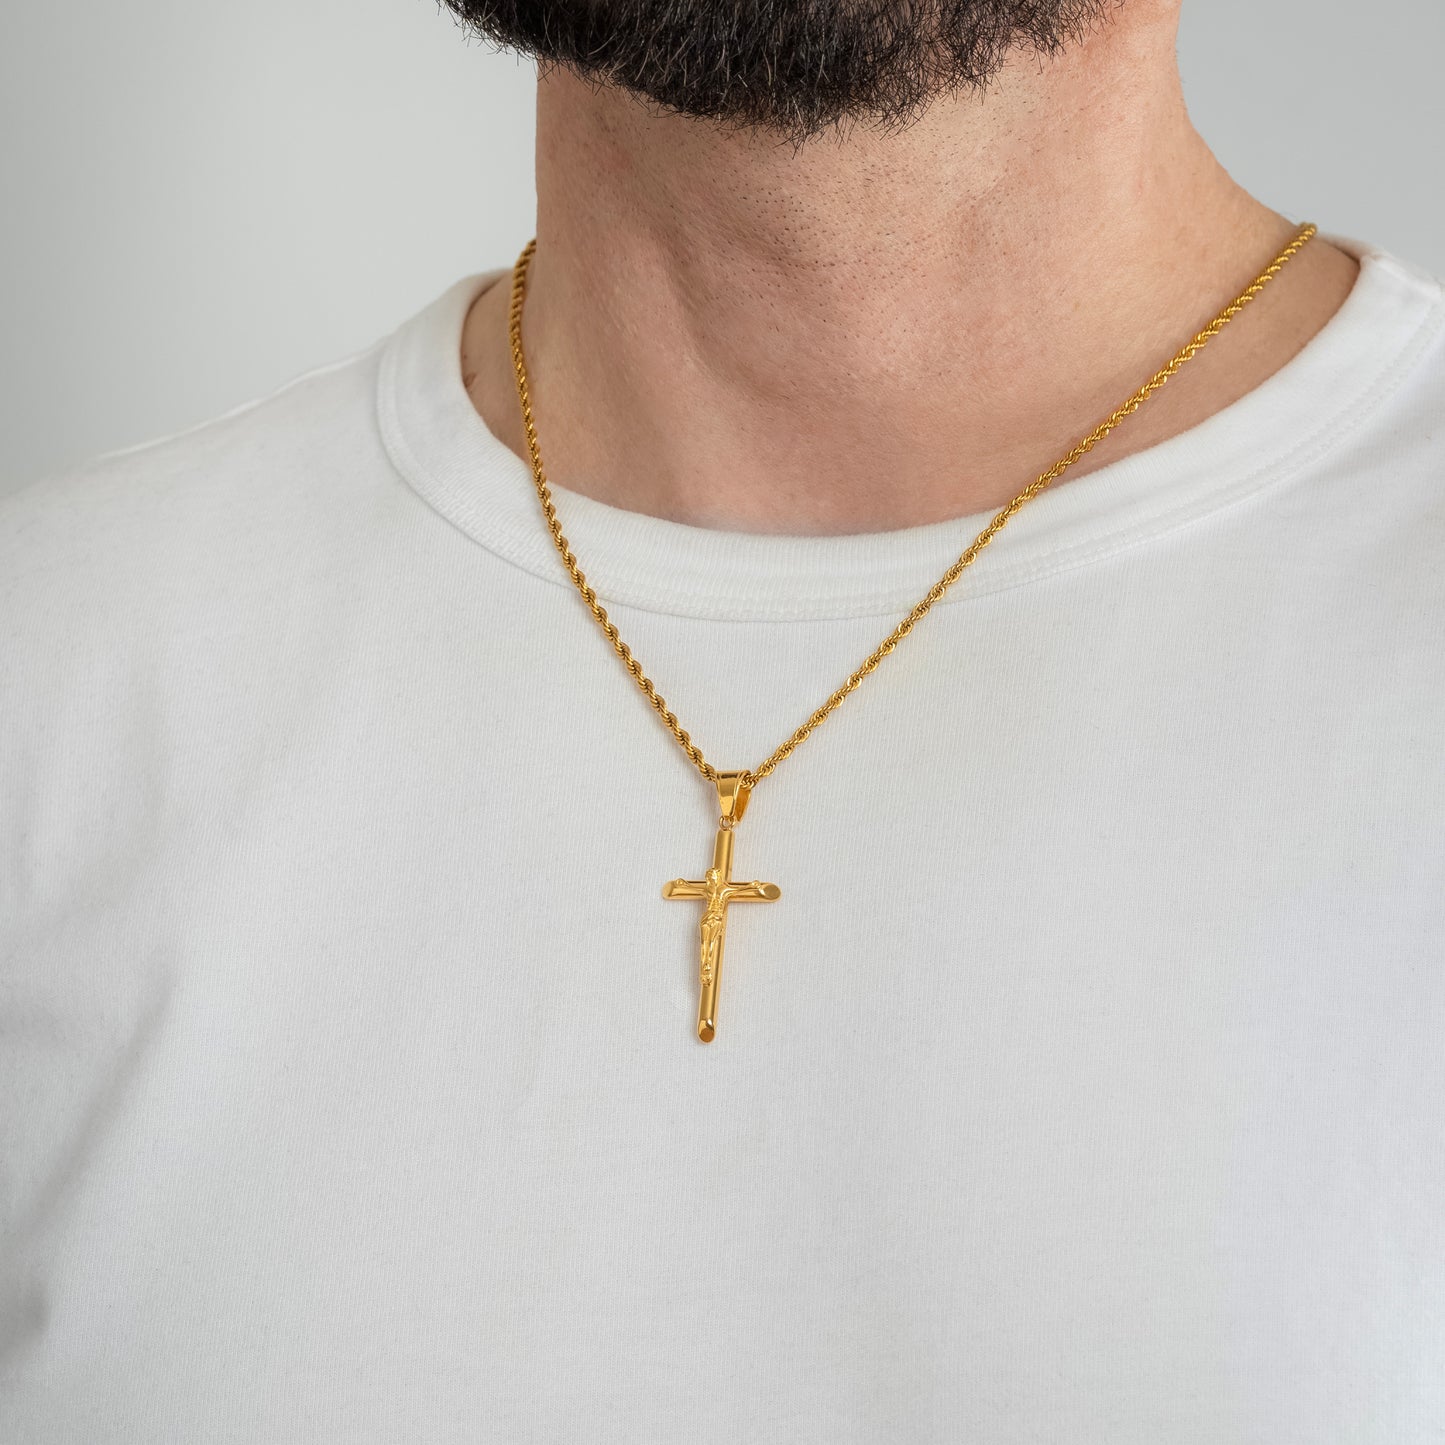 A male model in a white t-shirt wearing a Jesus Crucifix Minimalist Cross Gold Pendant with a 3mm Gold Rope chain 22 inches. Close-up image of the non-tarnish trending religious men's necklace.